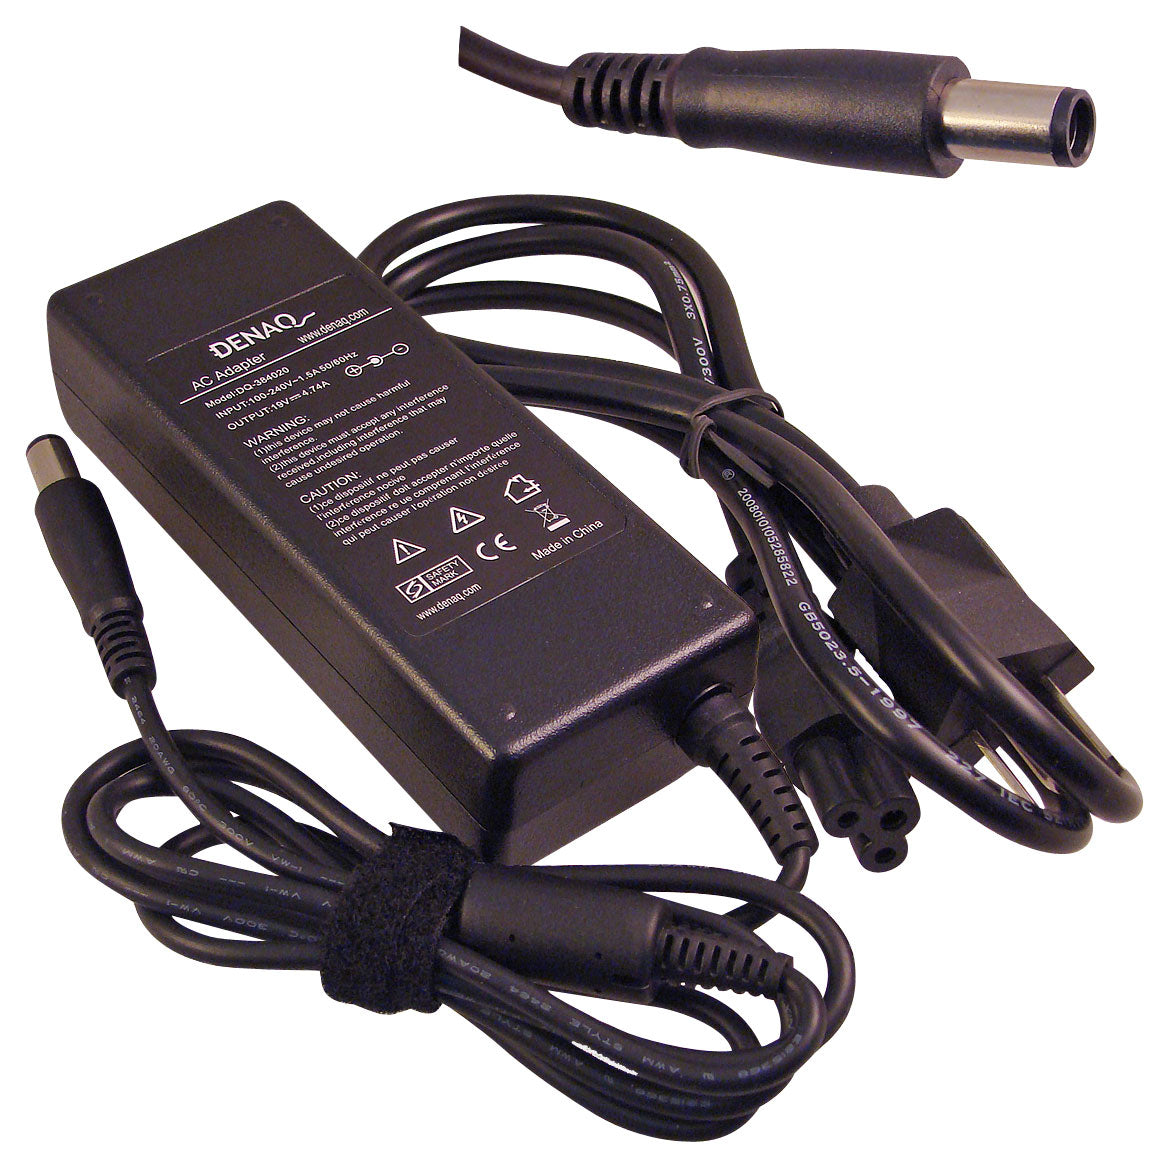 DENAQ - DQ-384020-7450 AC Power Adapter and Charger for Select HP Laptops and Tablets - Black